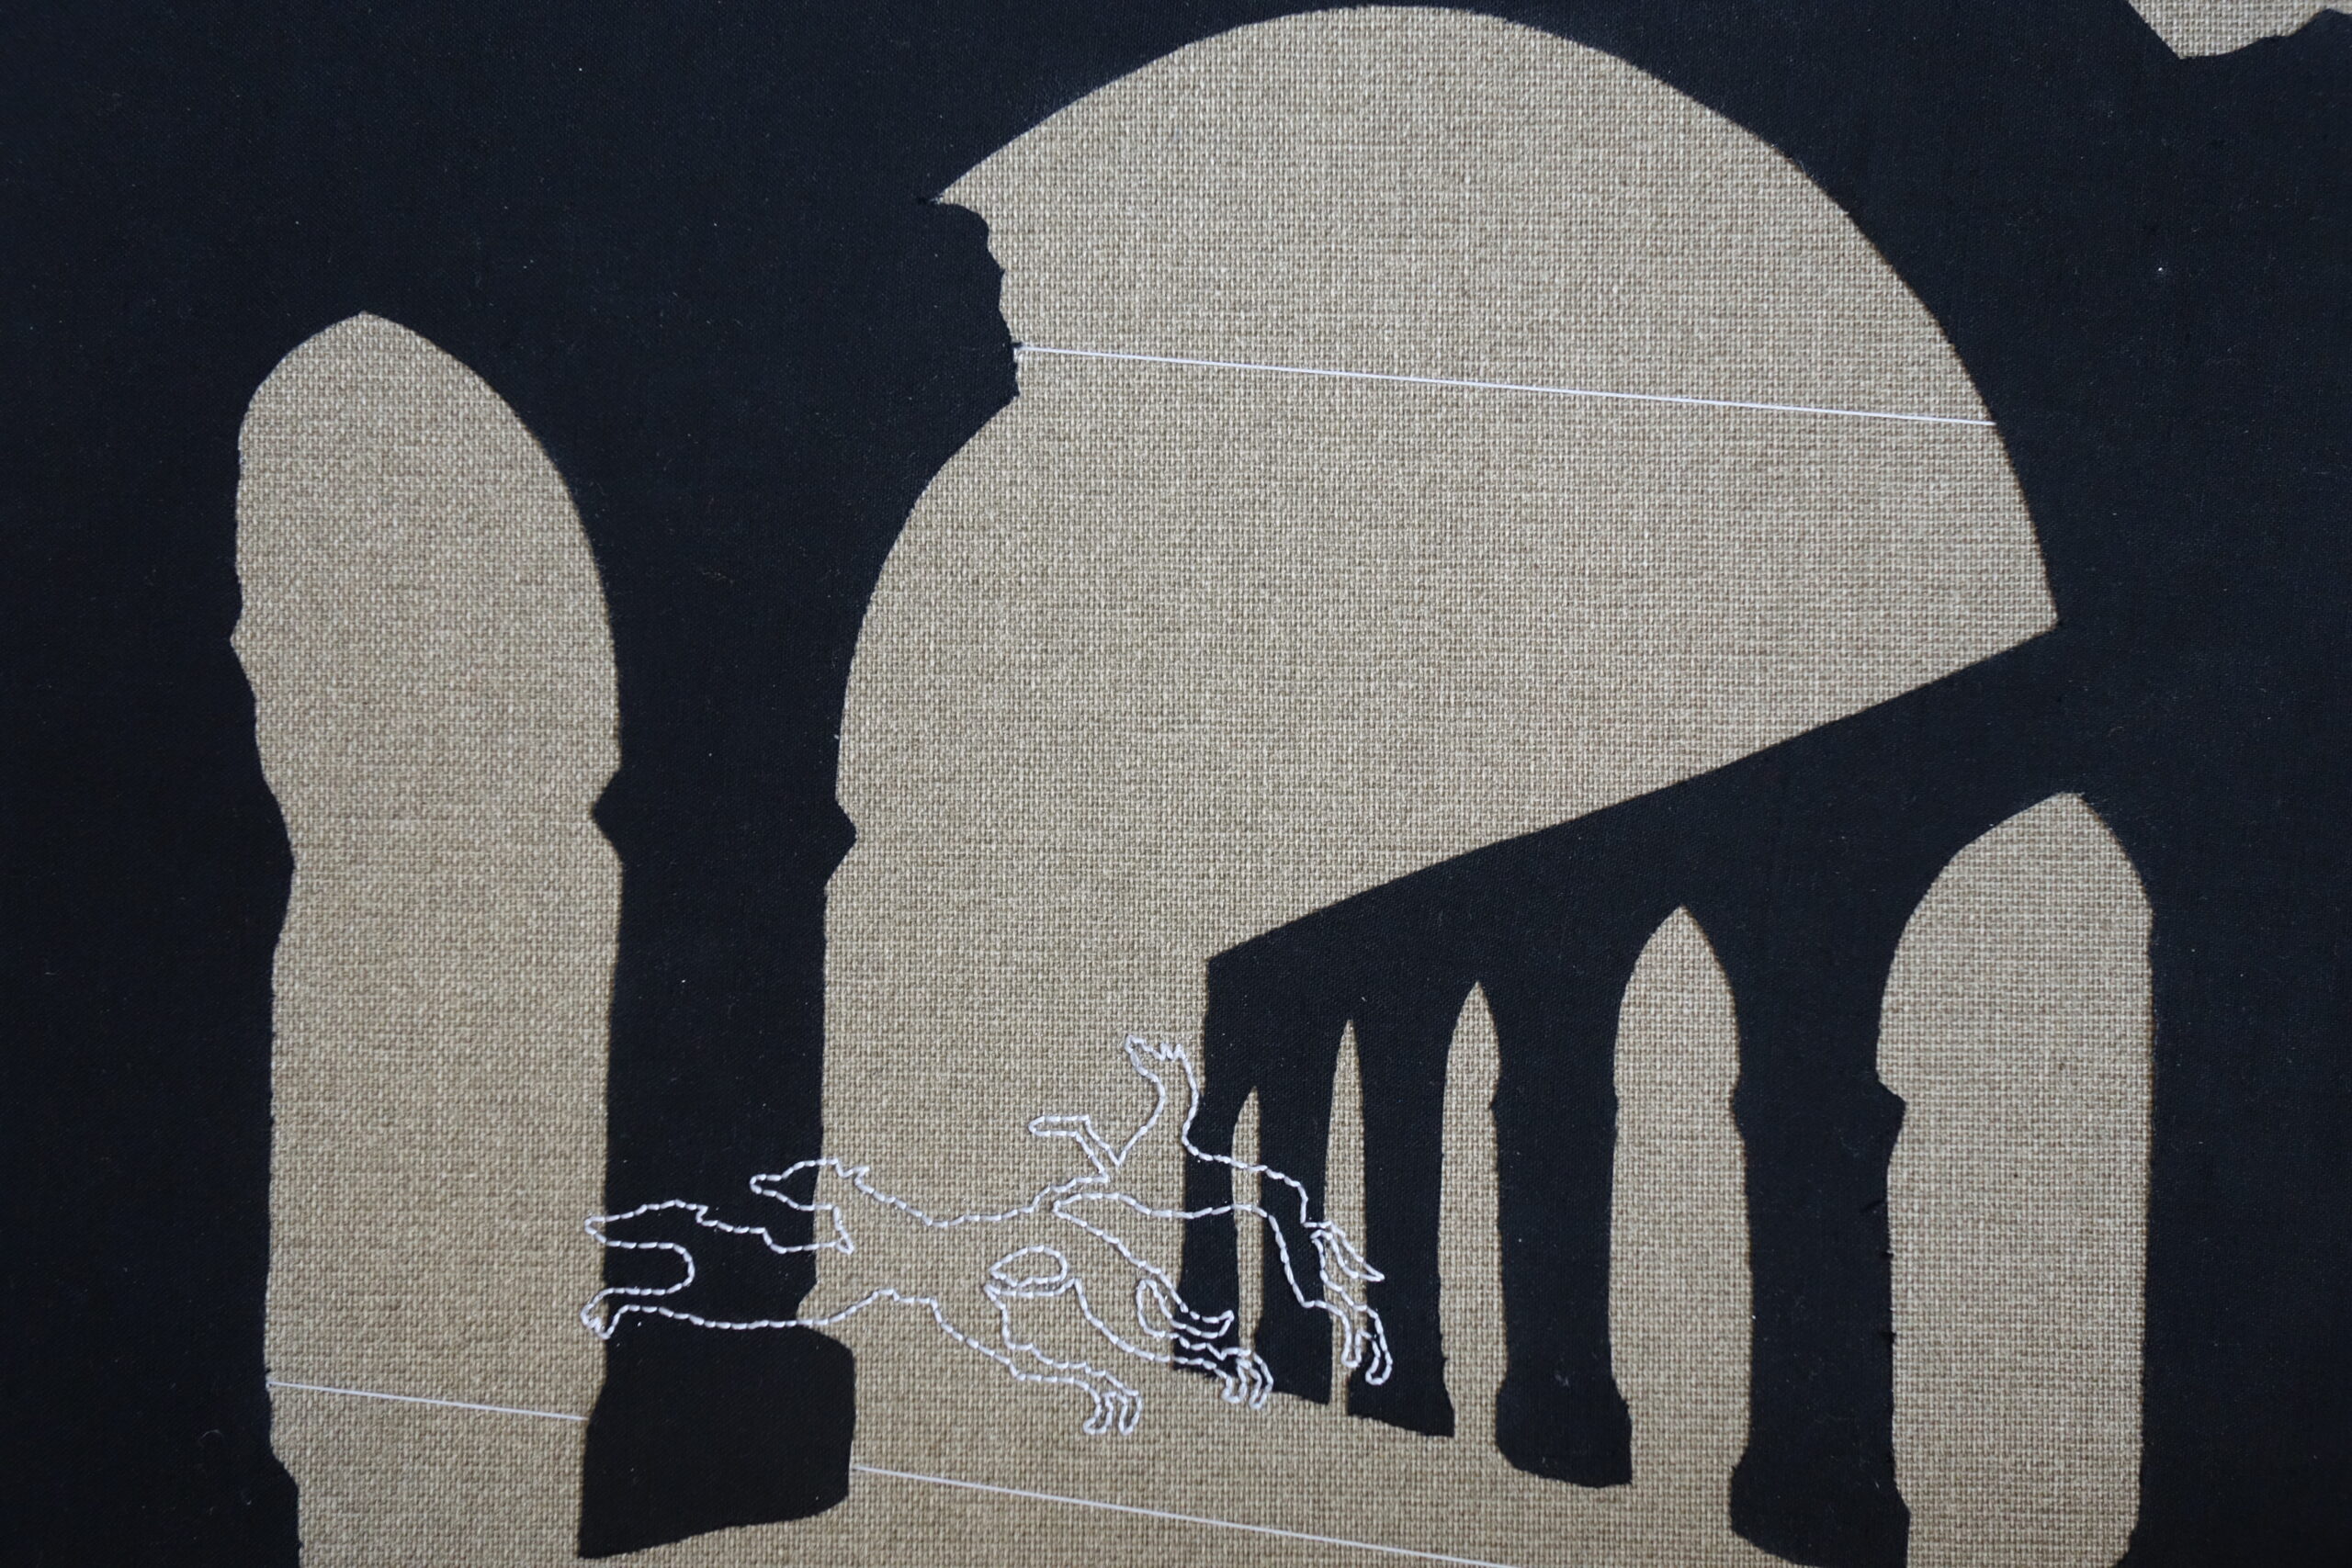 Black silhouettes of arches against a mid brown linen background, with greyhounds outlined in white embroidery